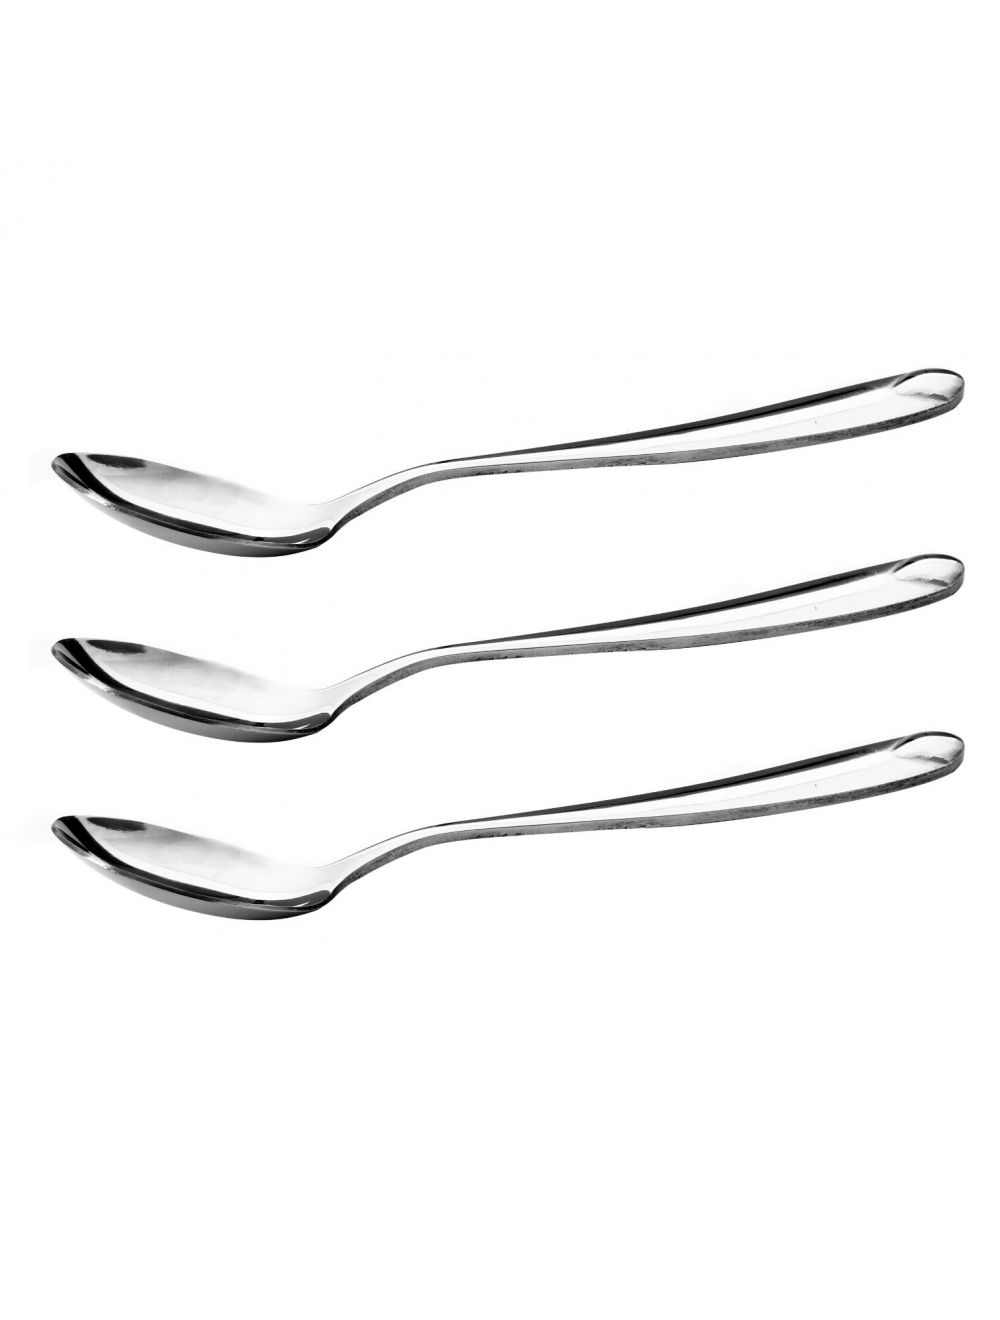 Royalford RF4190 SS Stainless Steel Soup Spoons